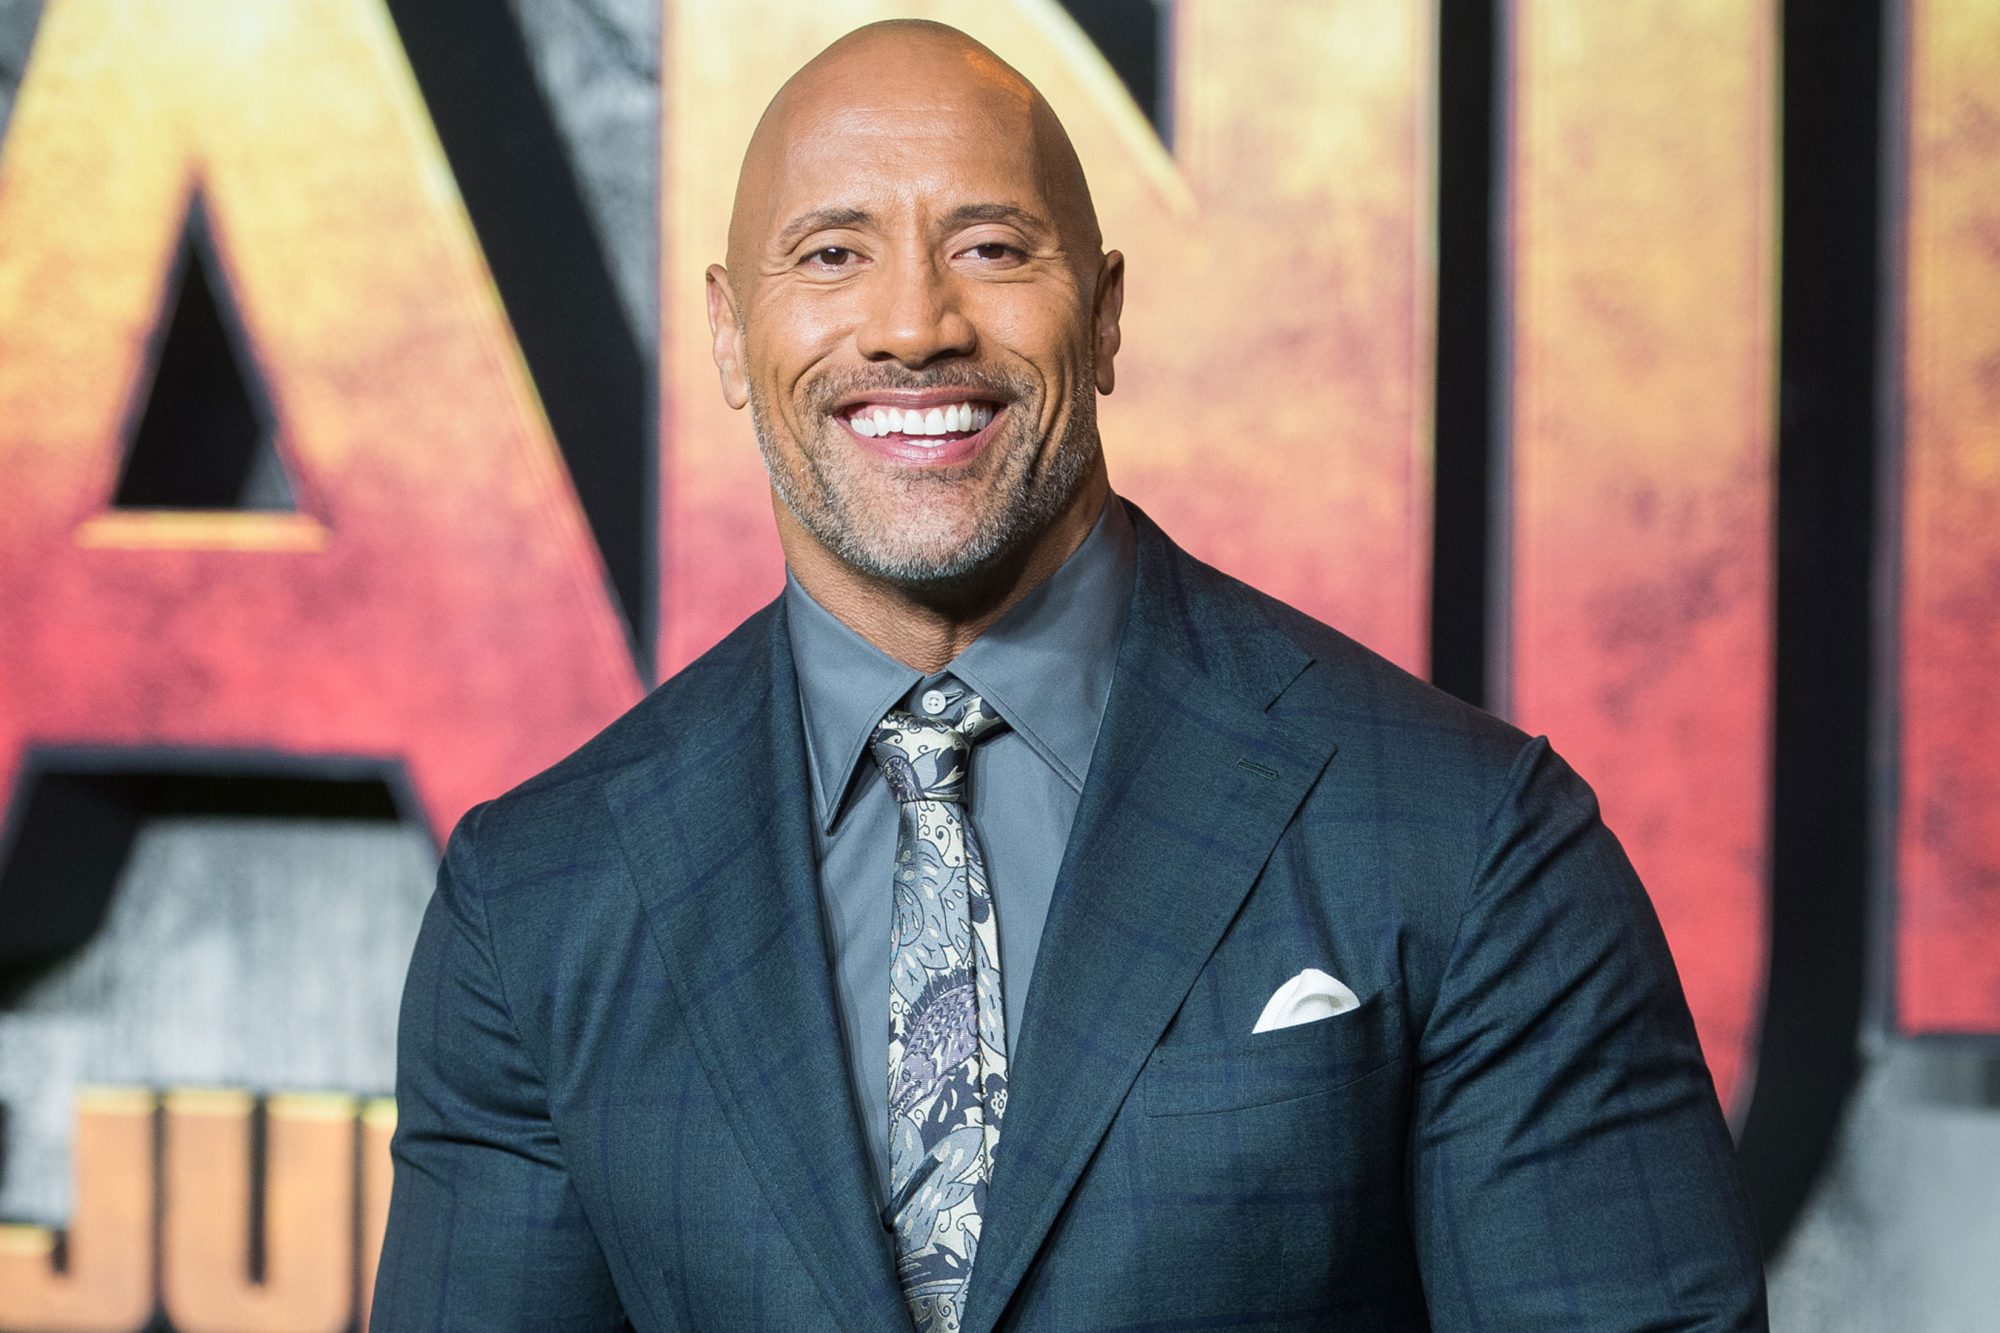 Dwayne Johnson: See photo of The Rock because why not